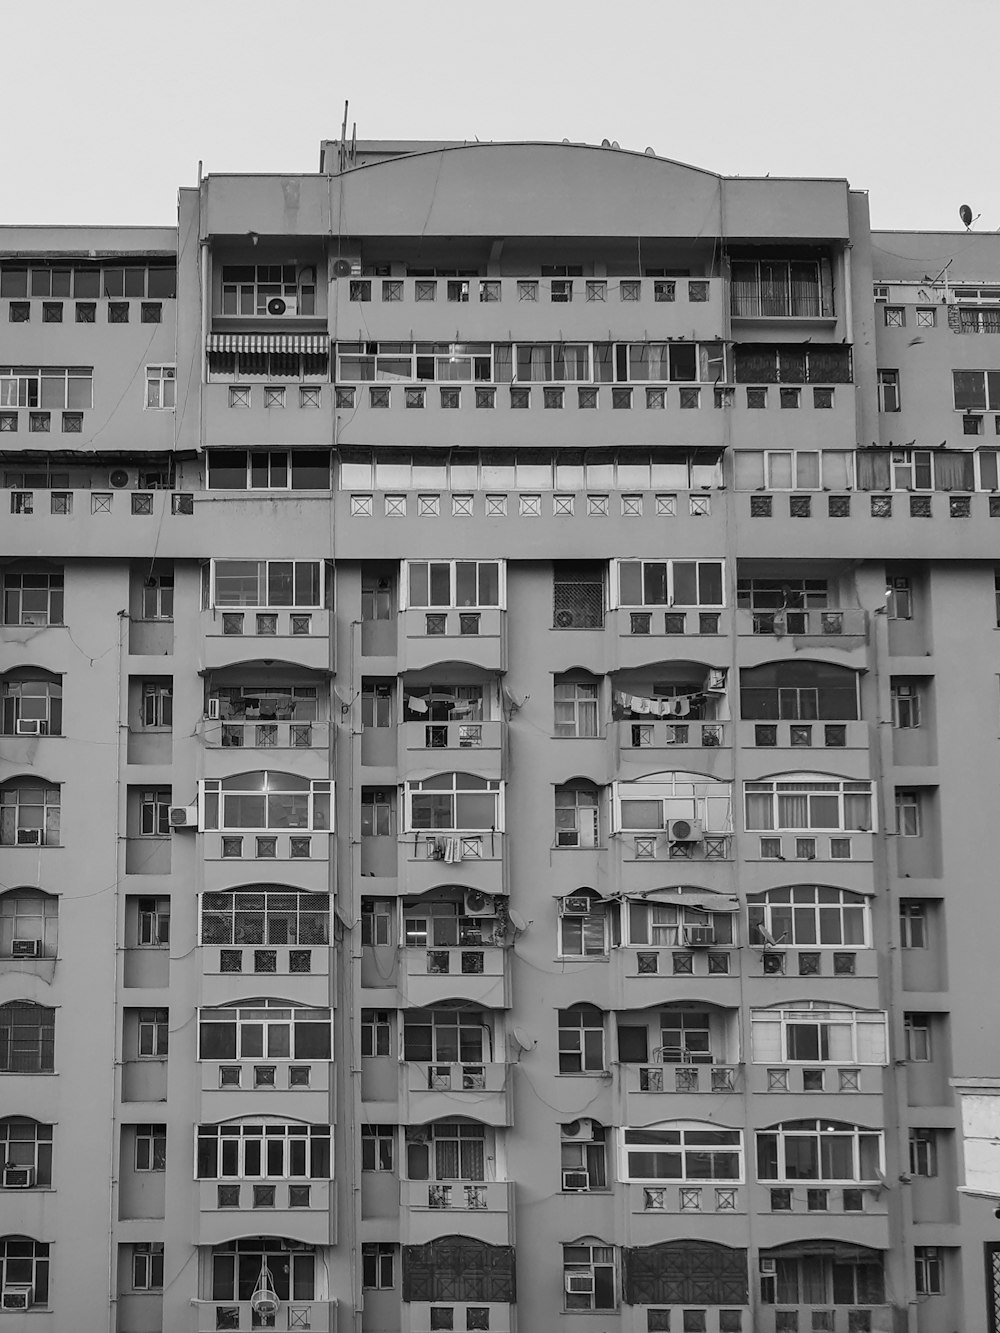 a tall building with lots of windows and balconies